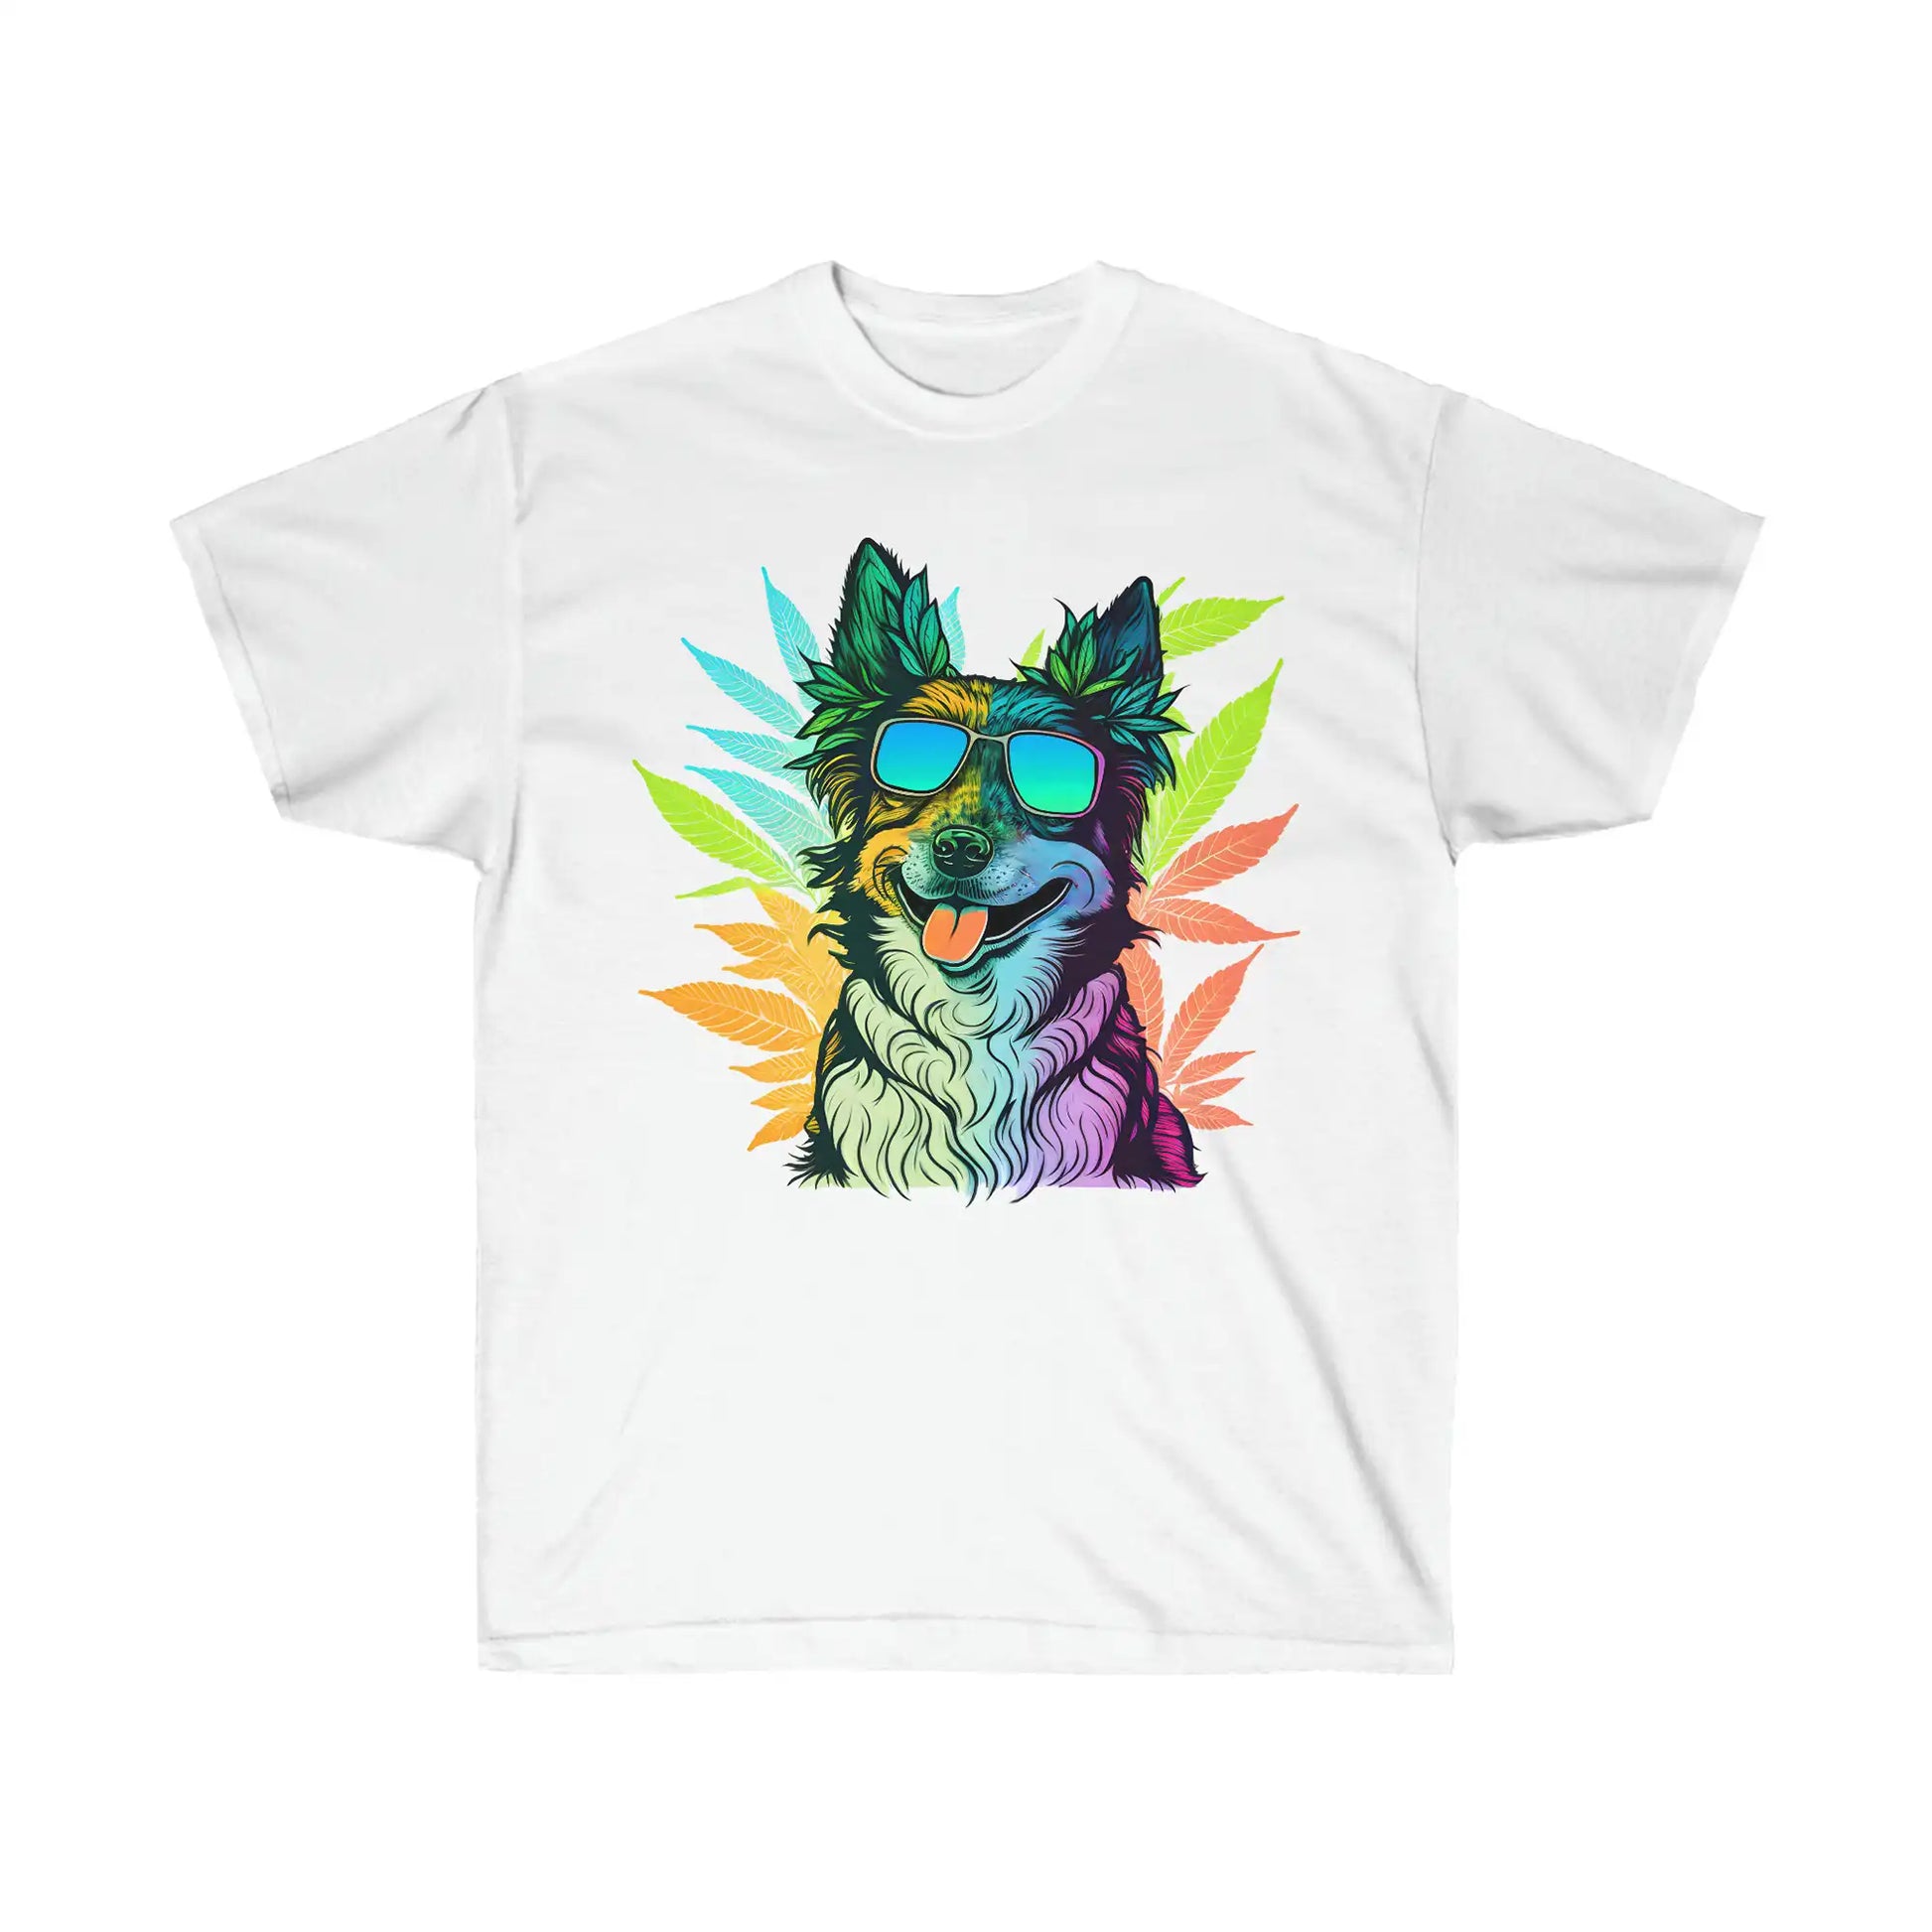 Cool Border Collie with shades surrounded by cannabis on a white weed t shirt